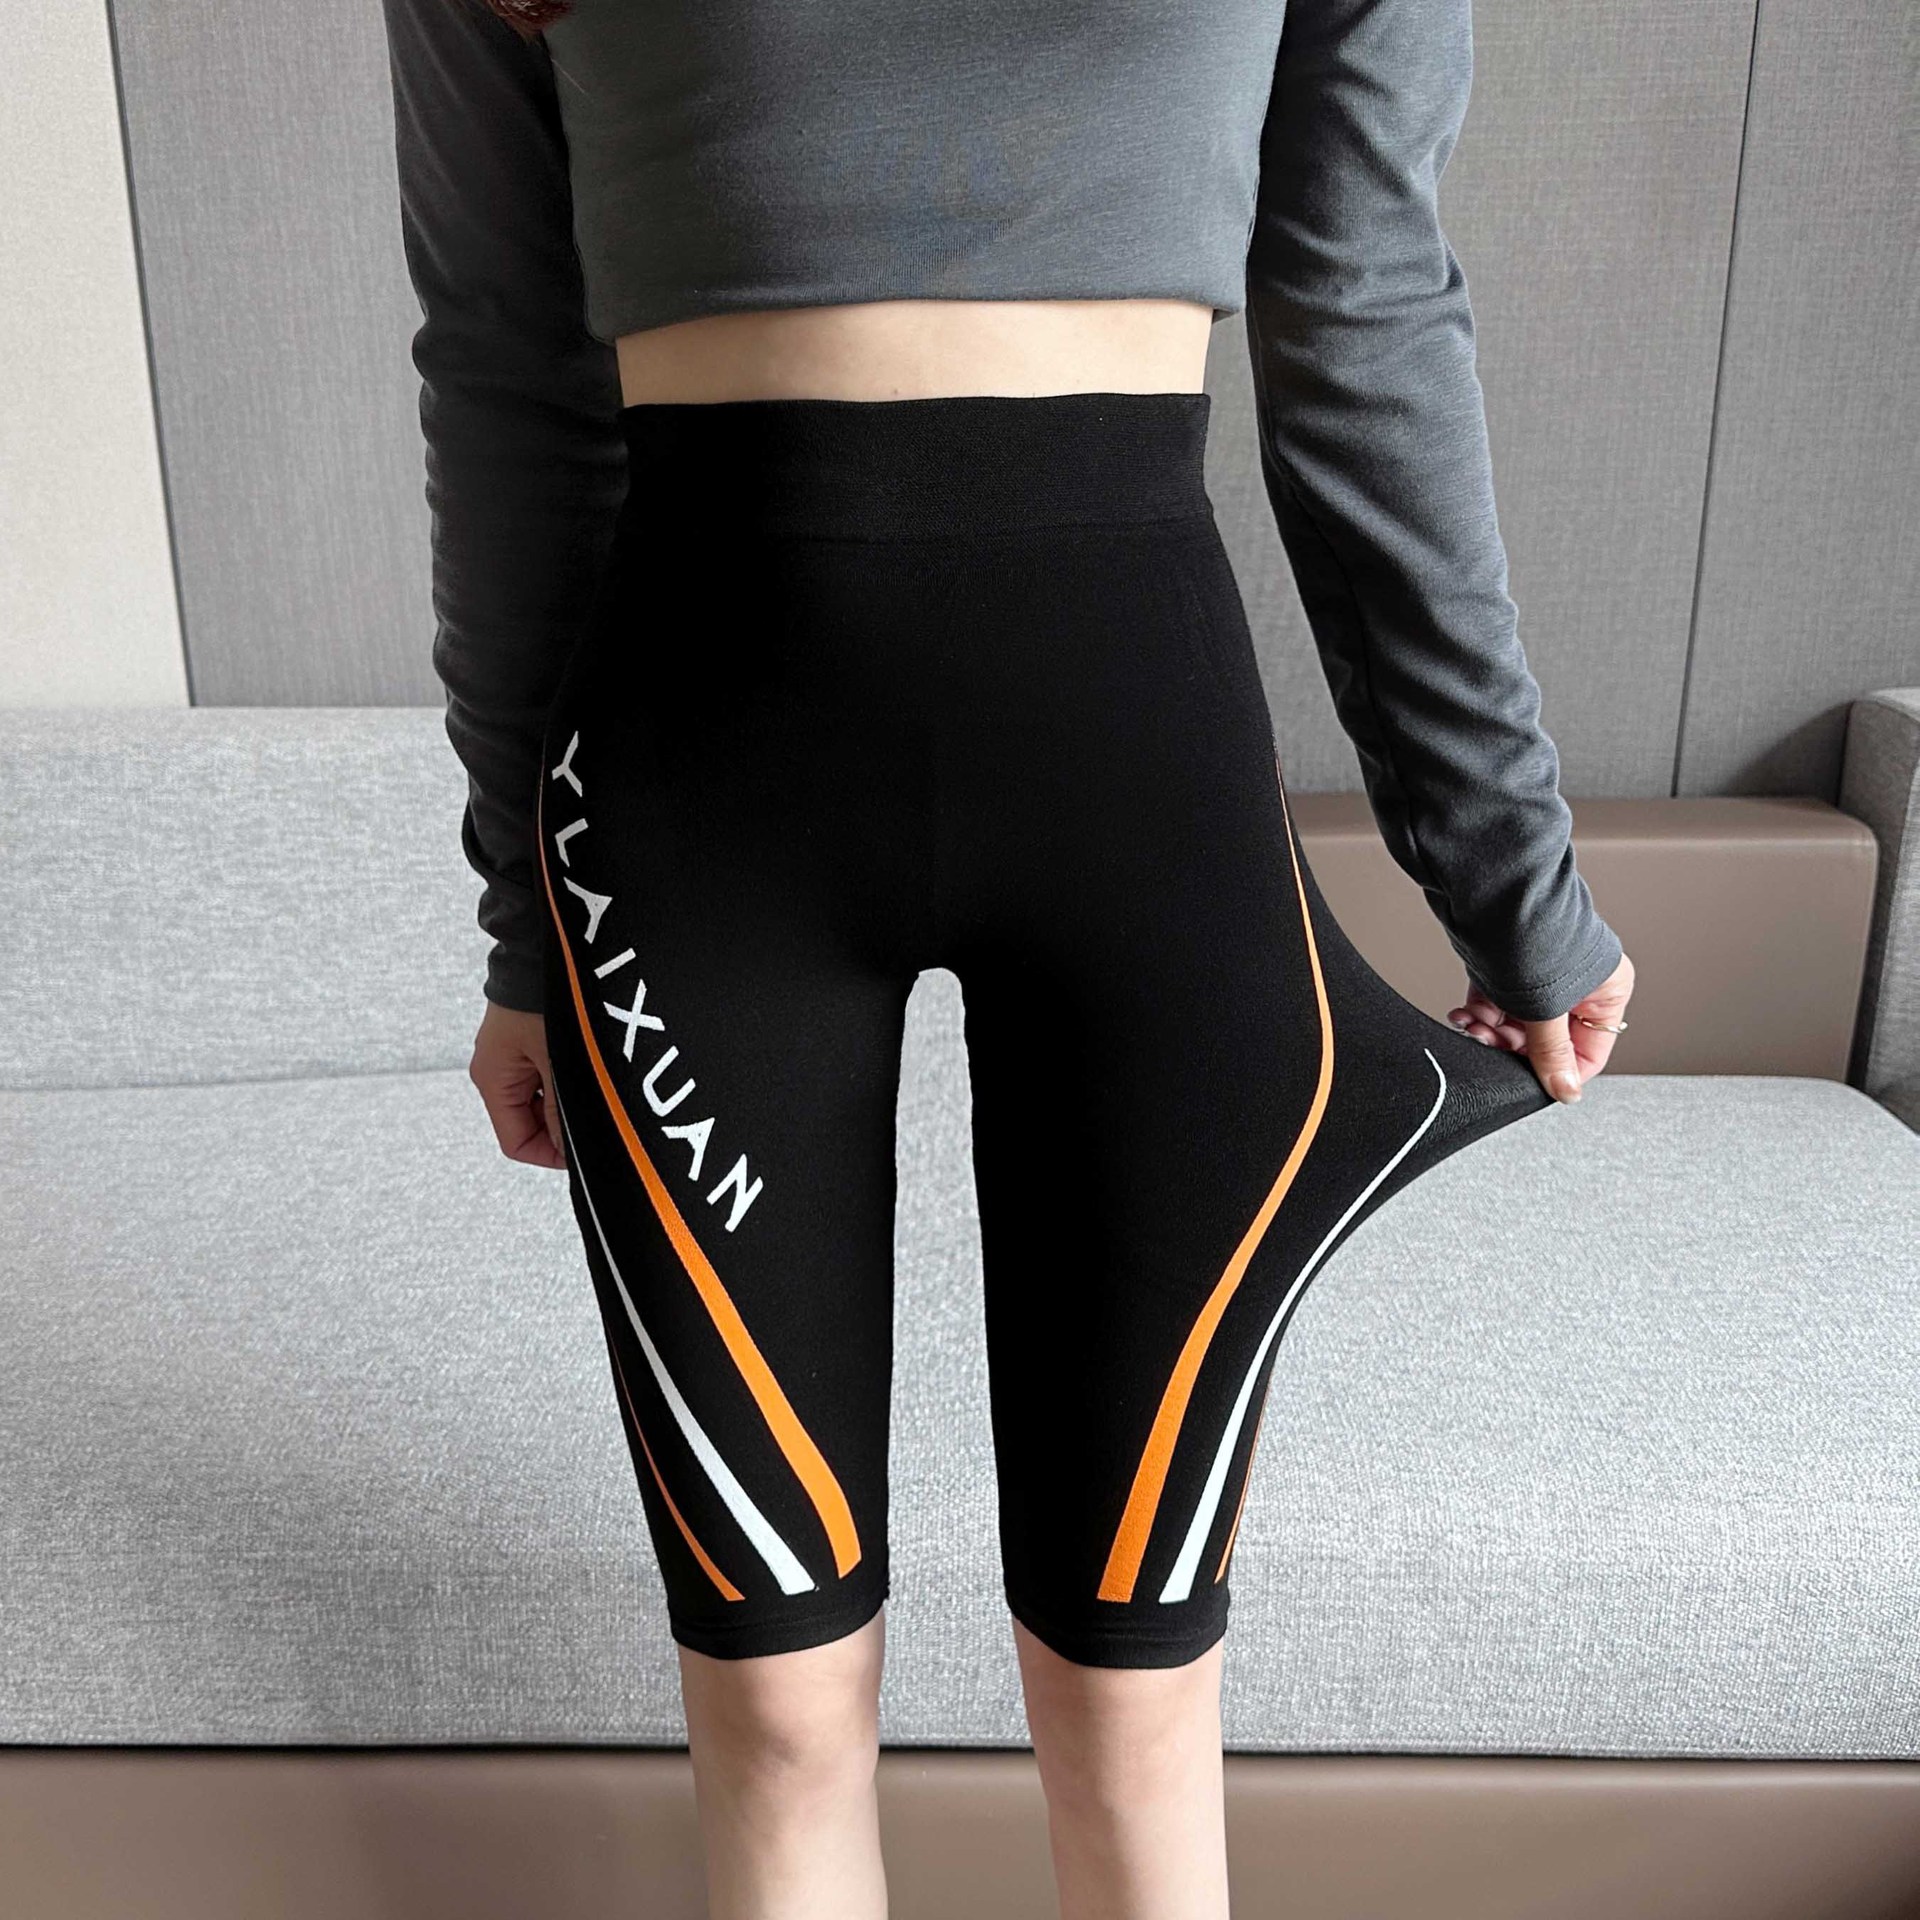 Modal Cropped Pants Trendy Colorful Printed Leggings Cycling Quick-Drying Breathable High Waist Cropped Sports Pants Wholesale